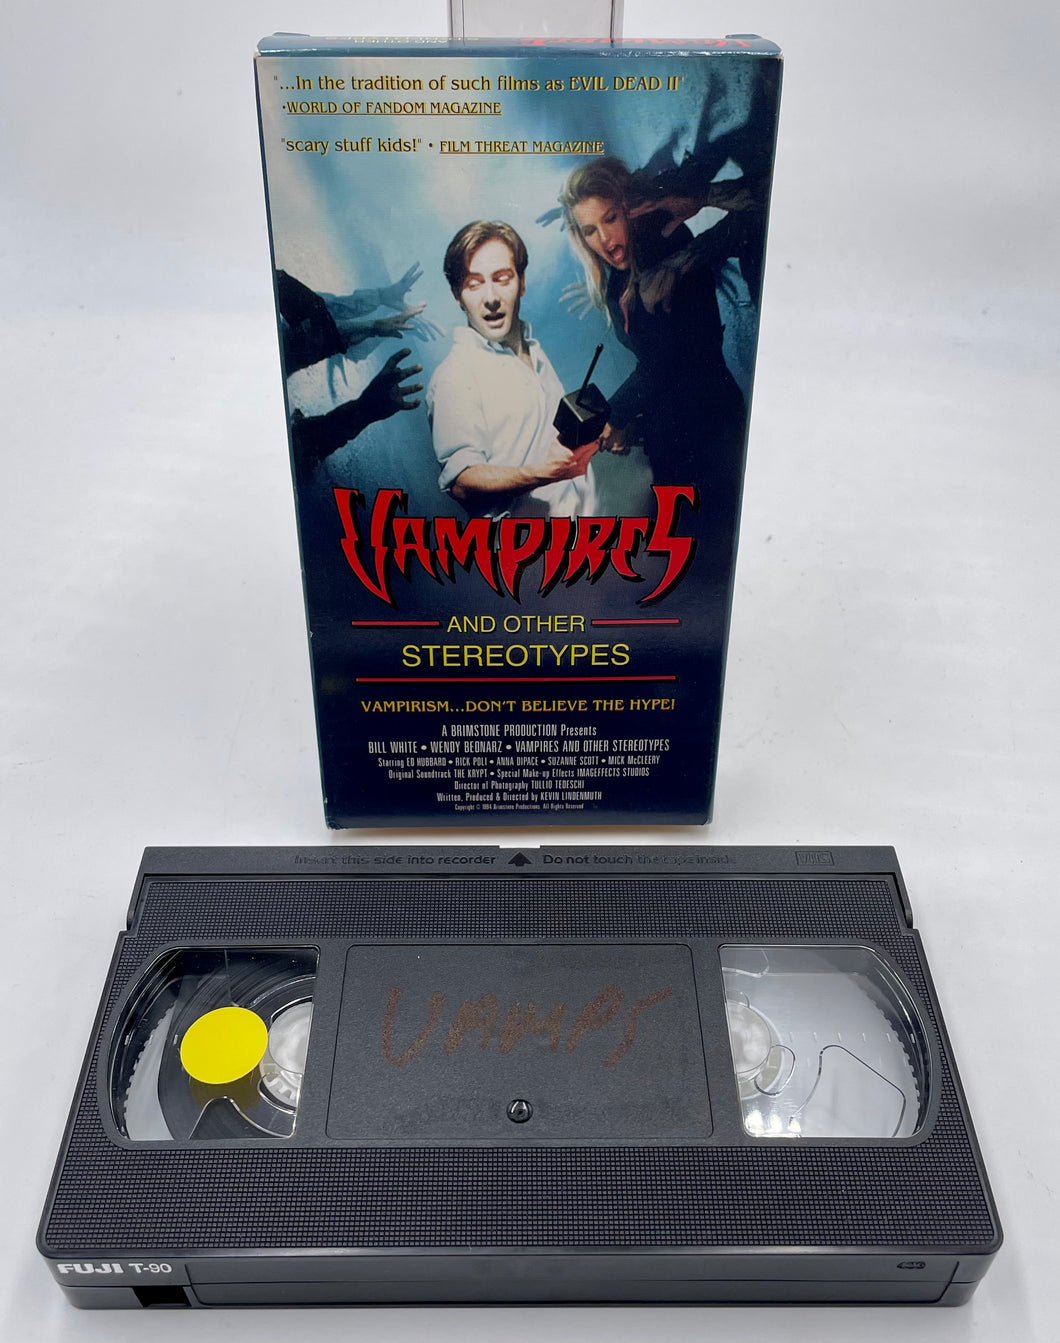 Vampires and other Stereotypes RARE Original VHS PAL